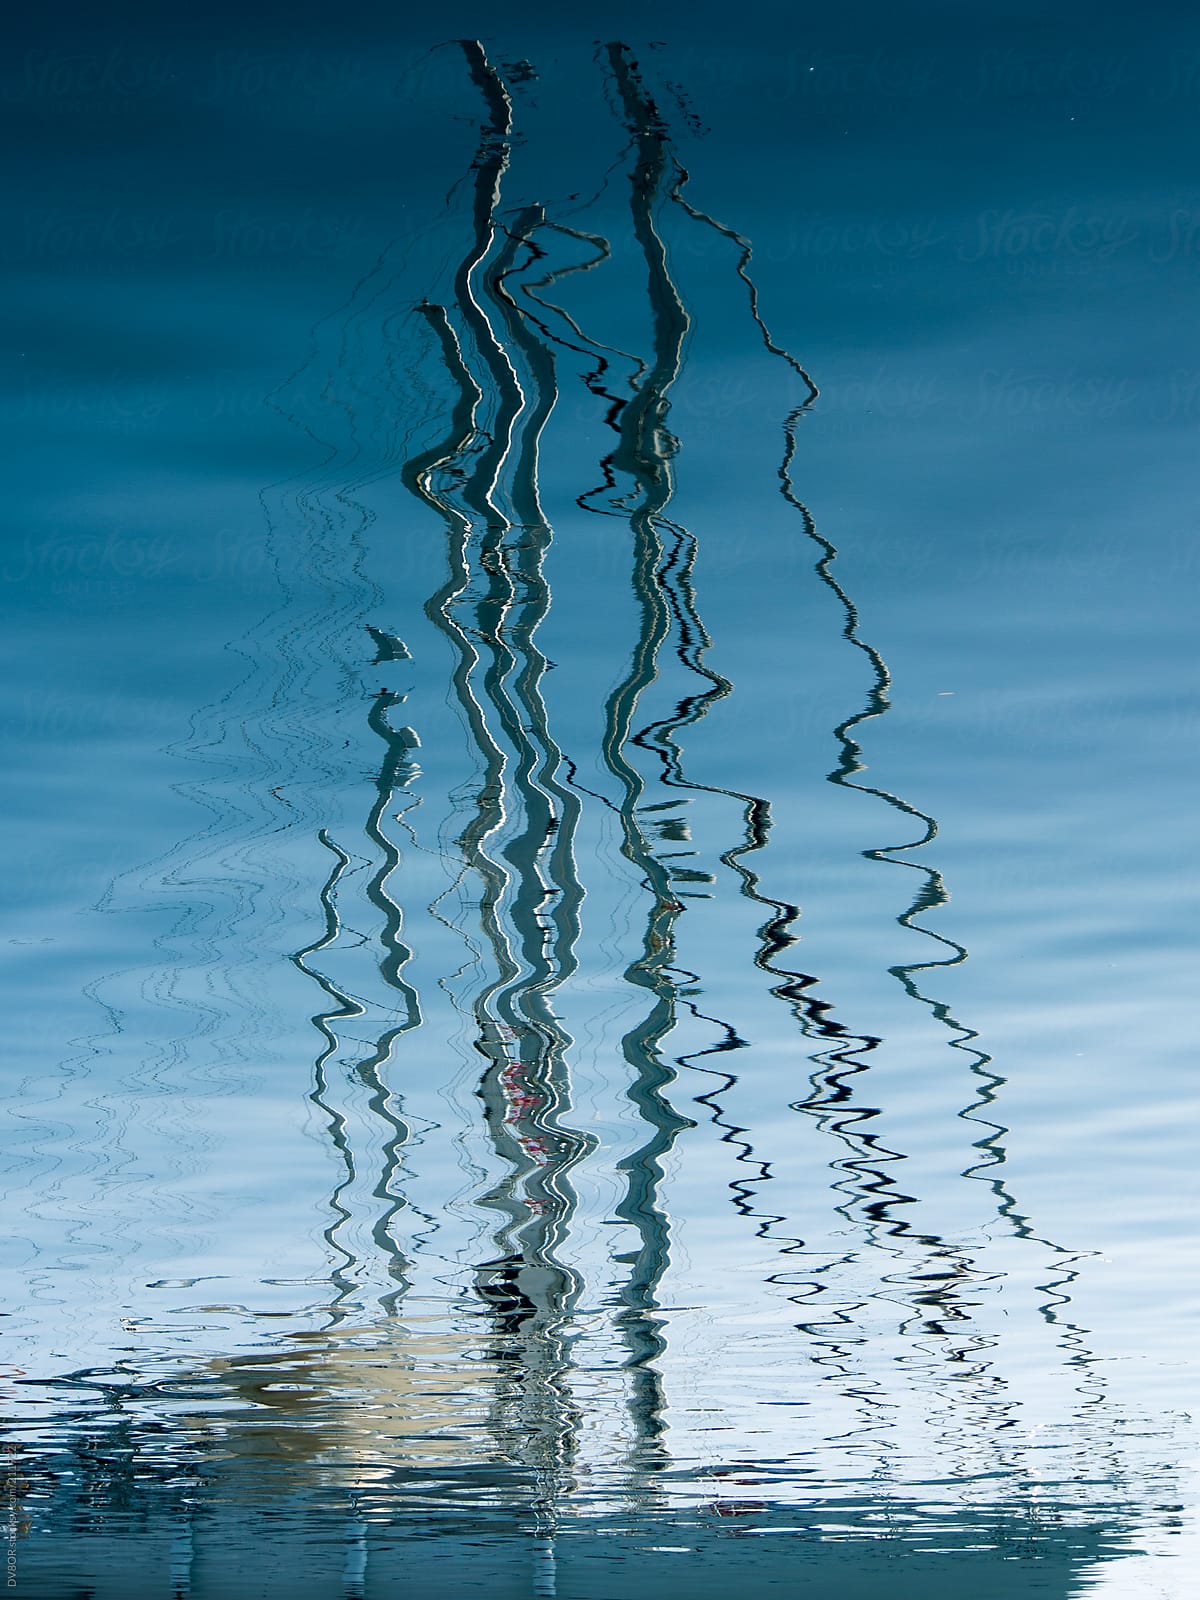 Reflection of Sailing boat or yacht on the water in Majorca, Spain